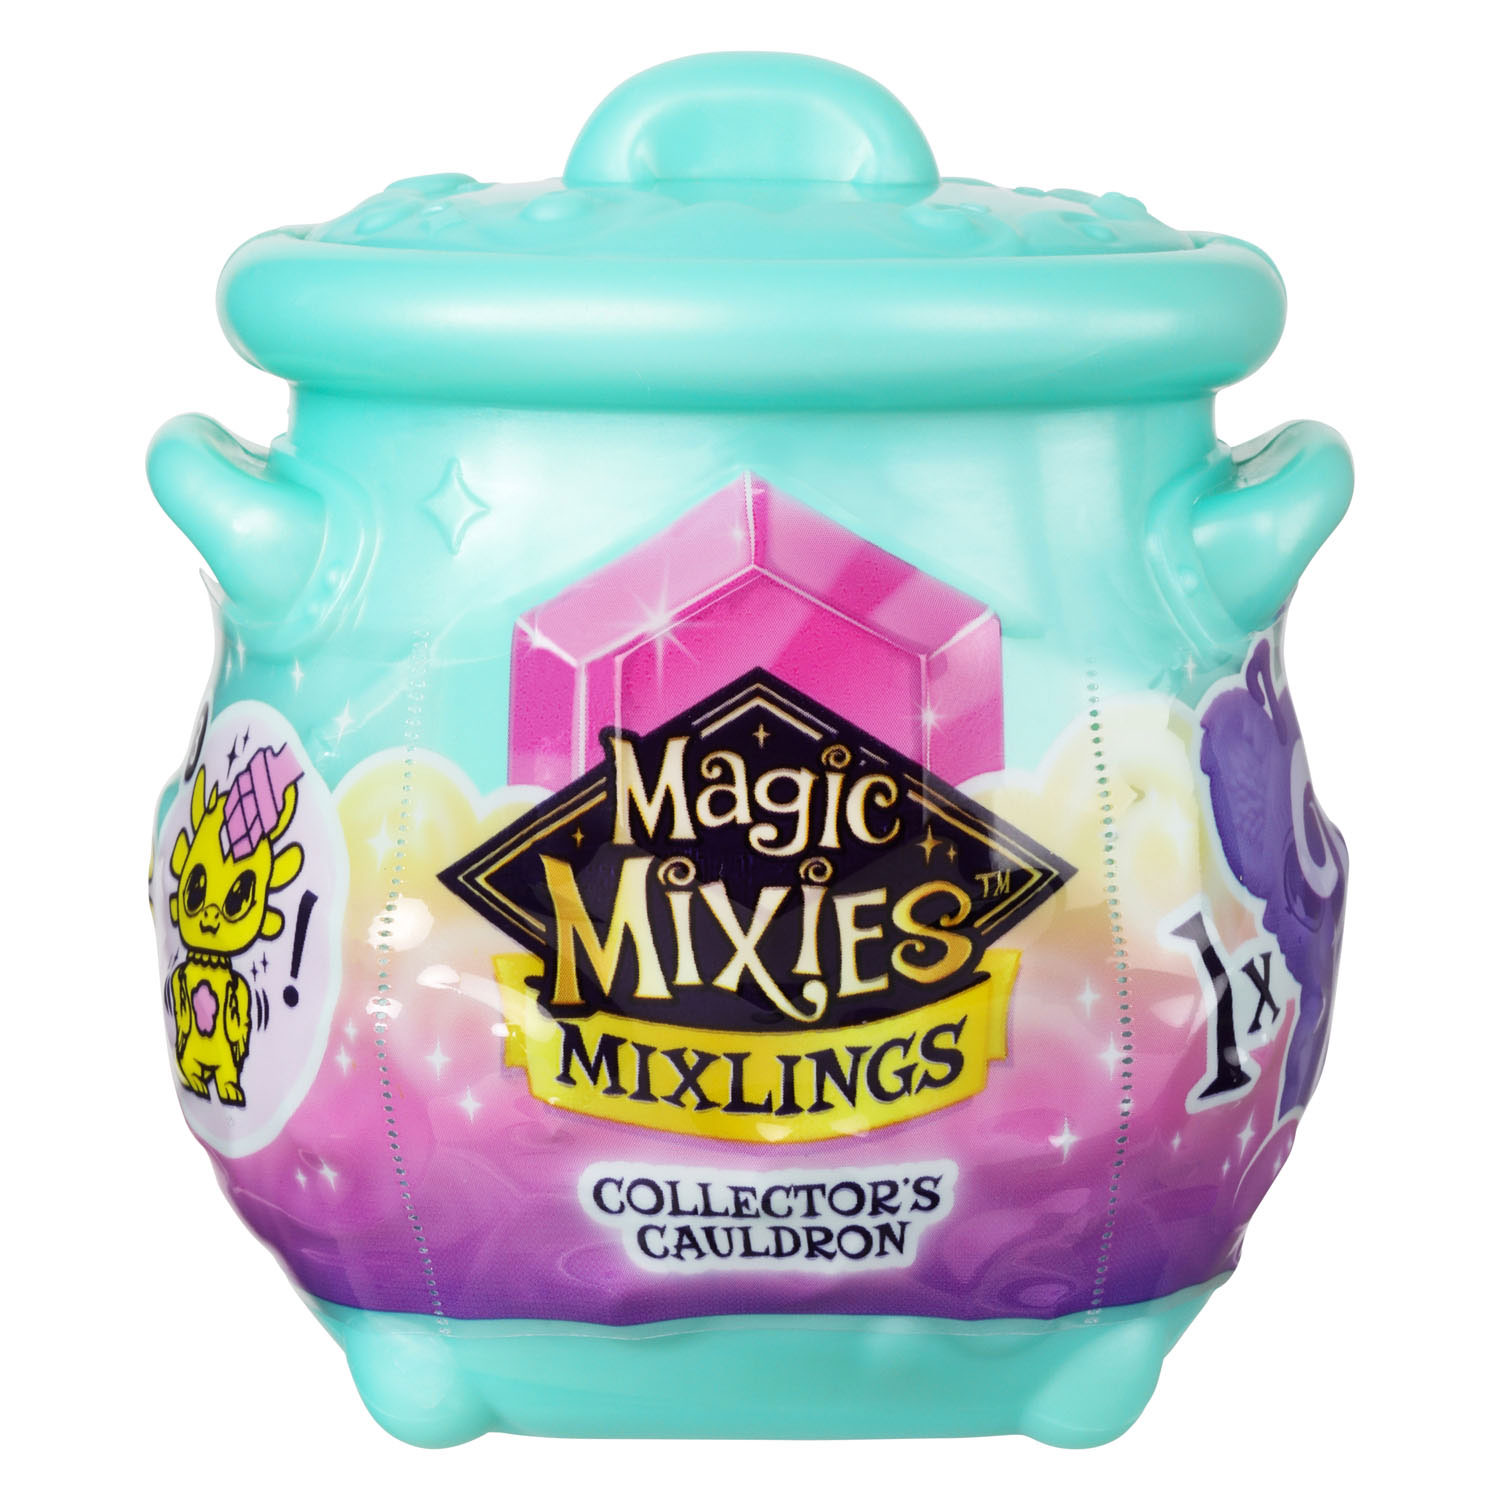 Magic Mixies Mixlings Collection Wasserkocher Serie 2